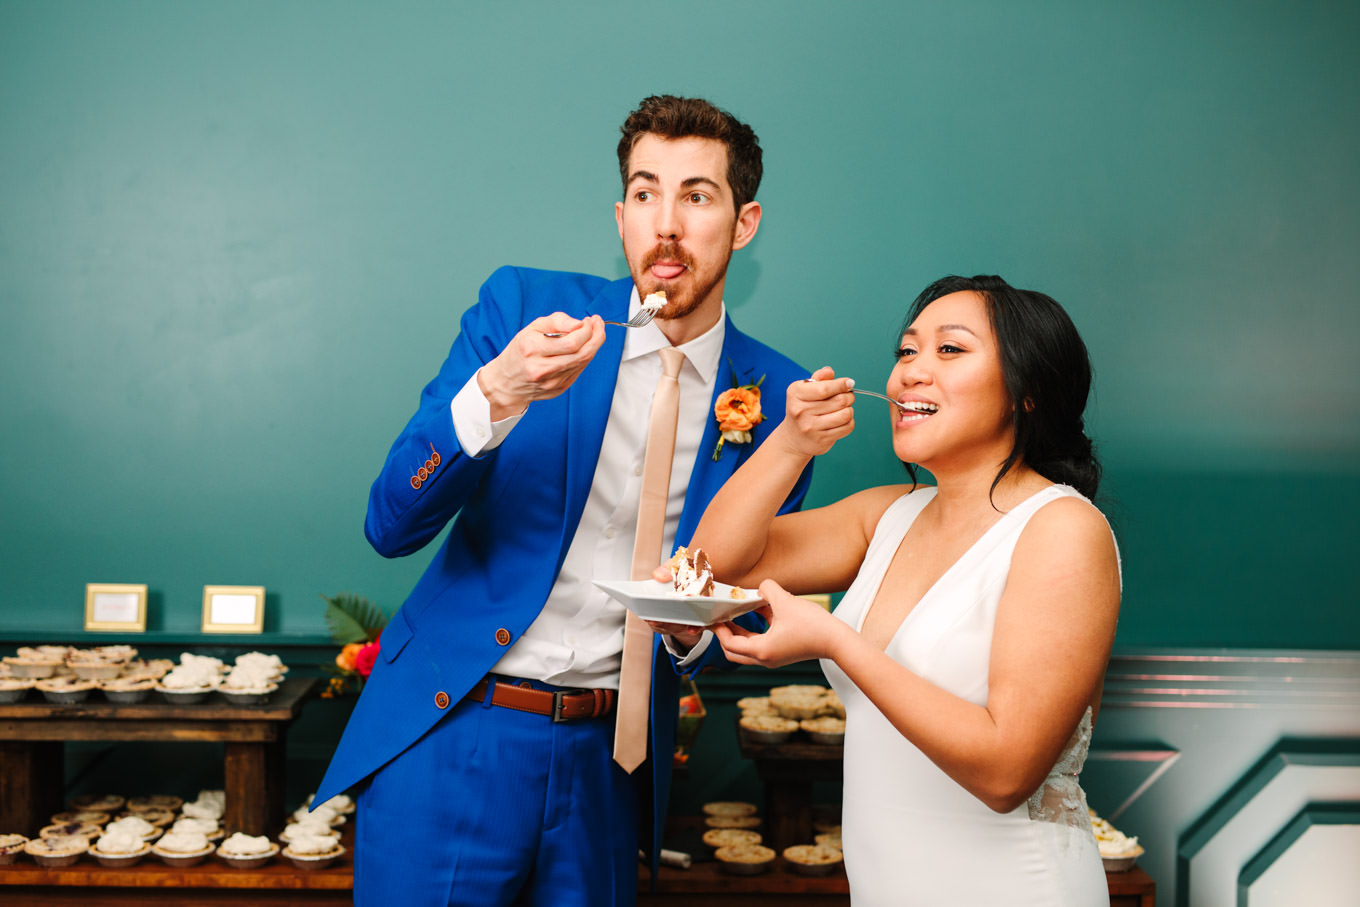 Bride and groom eating pie together | TV inspired wedding at The Fig House Los Angeles | Published on The Knot | Fresh and colorful photography for fun-loving couples in Southern California | #losangeleswedding #TVwedding #colorfulwedding #theknot   Source: Mary Costa Photography | Los Angeles wedding photographer